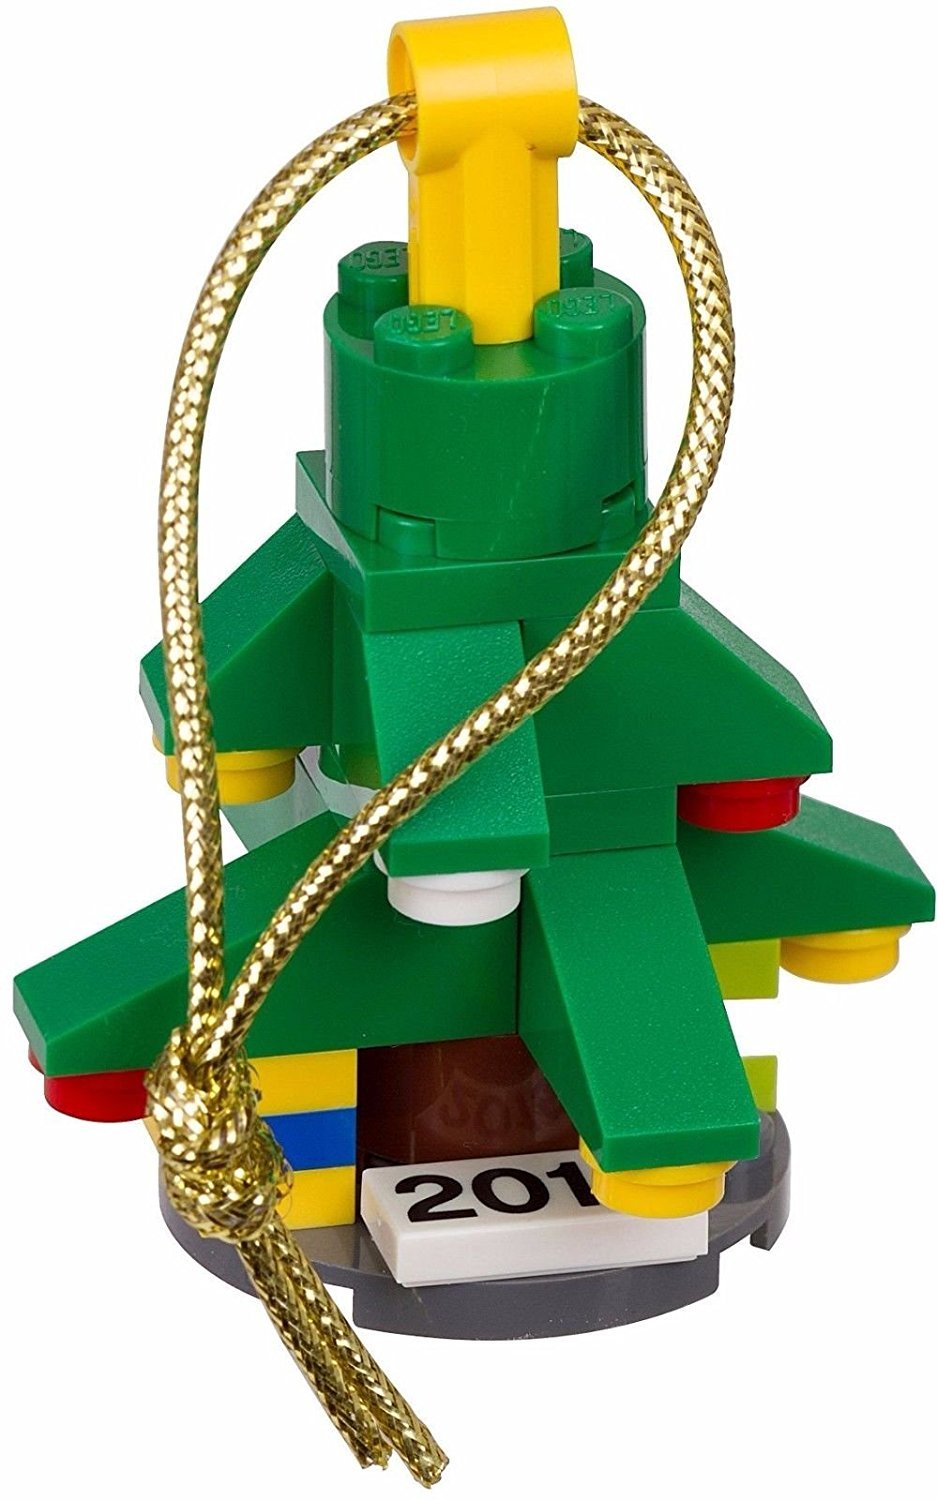 Lego Holiday Christmas 2015 Ornament Tree 5003083 New in Polybag!